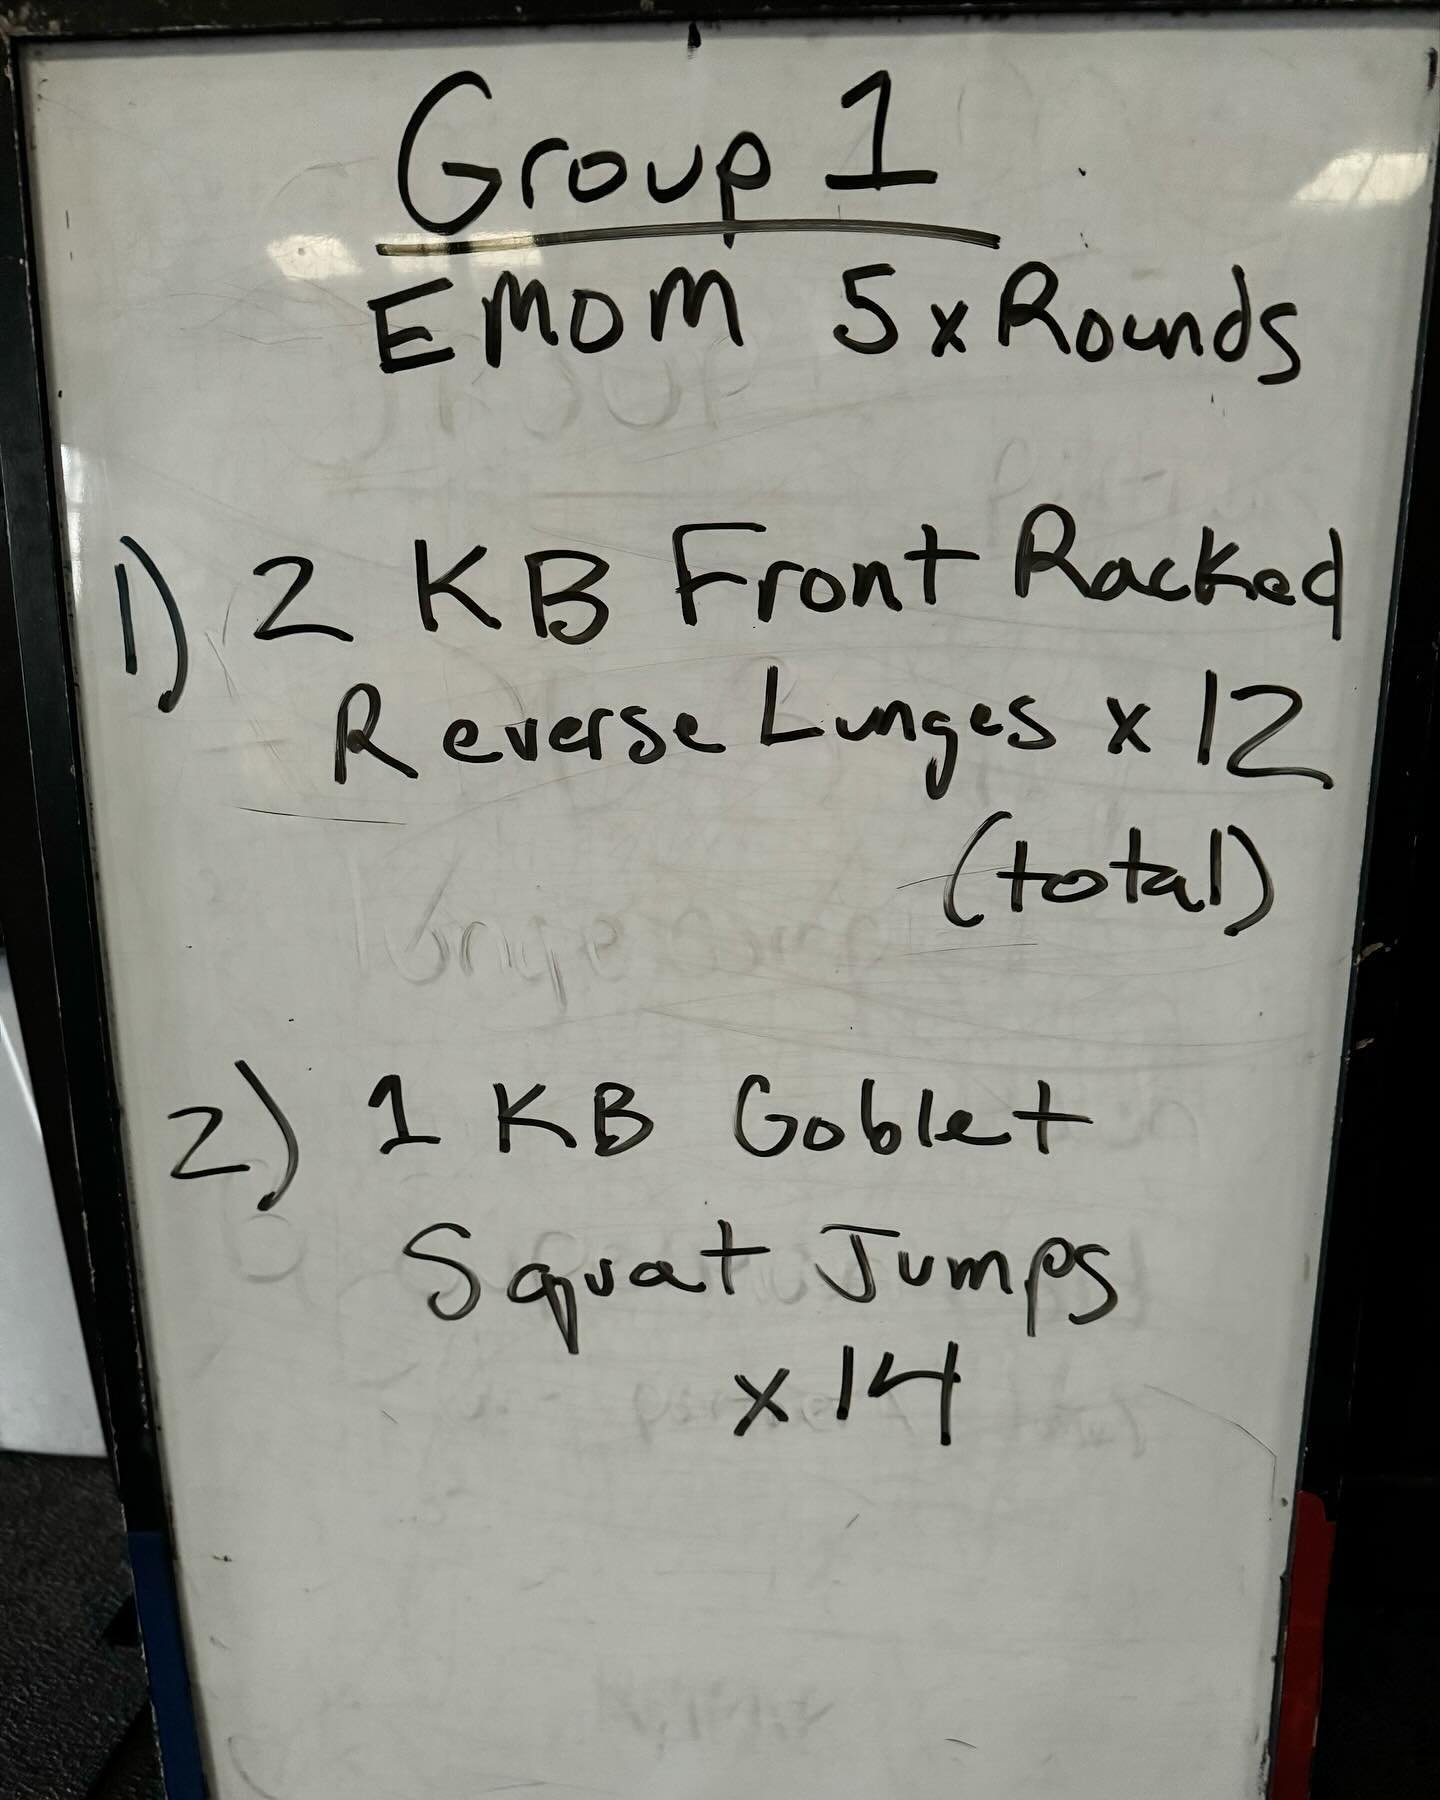 FREE WORKOUT! Monday&rsquo;s General Mountain class. 5 groups, all EMOM (every minute on the minute) for 10 minutes each. Minute one is exercise one, minute two is exercise two. Do a total of 5 rounds each group. 

Do the amount of reps in each minut